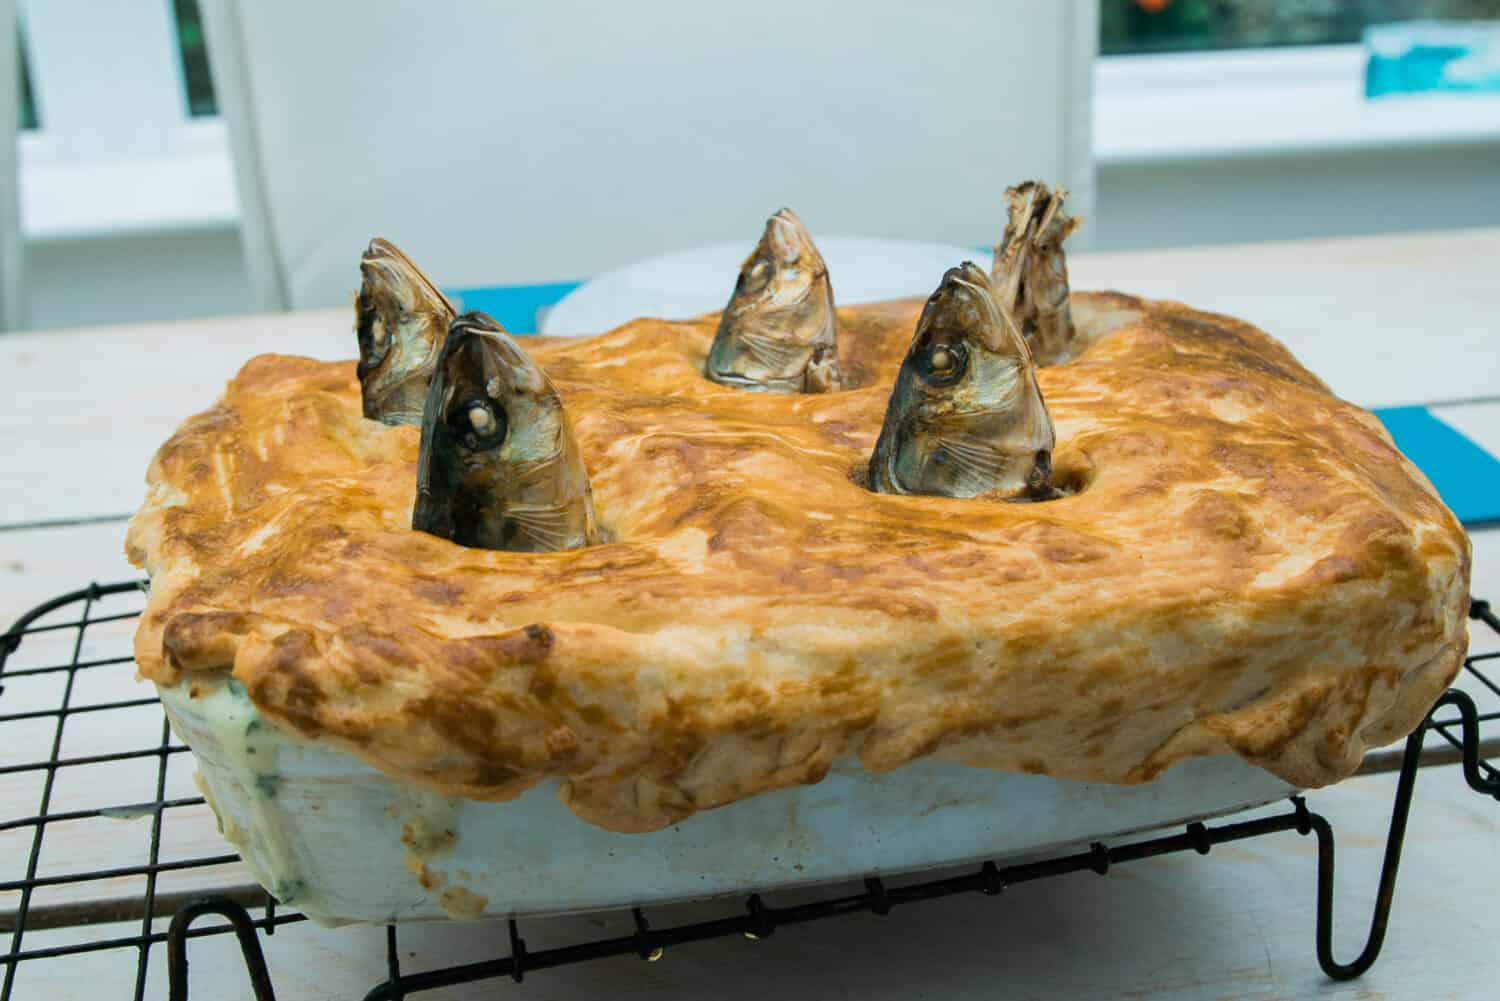 Stargazy pie in Mousehole - a Cornish dish